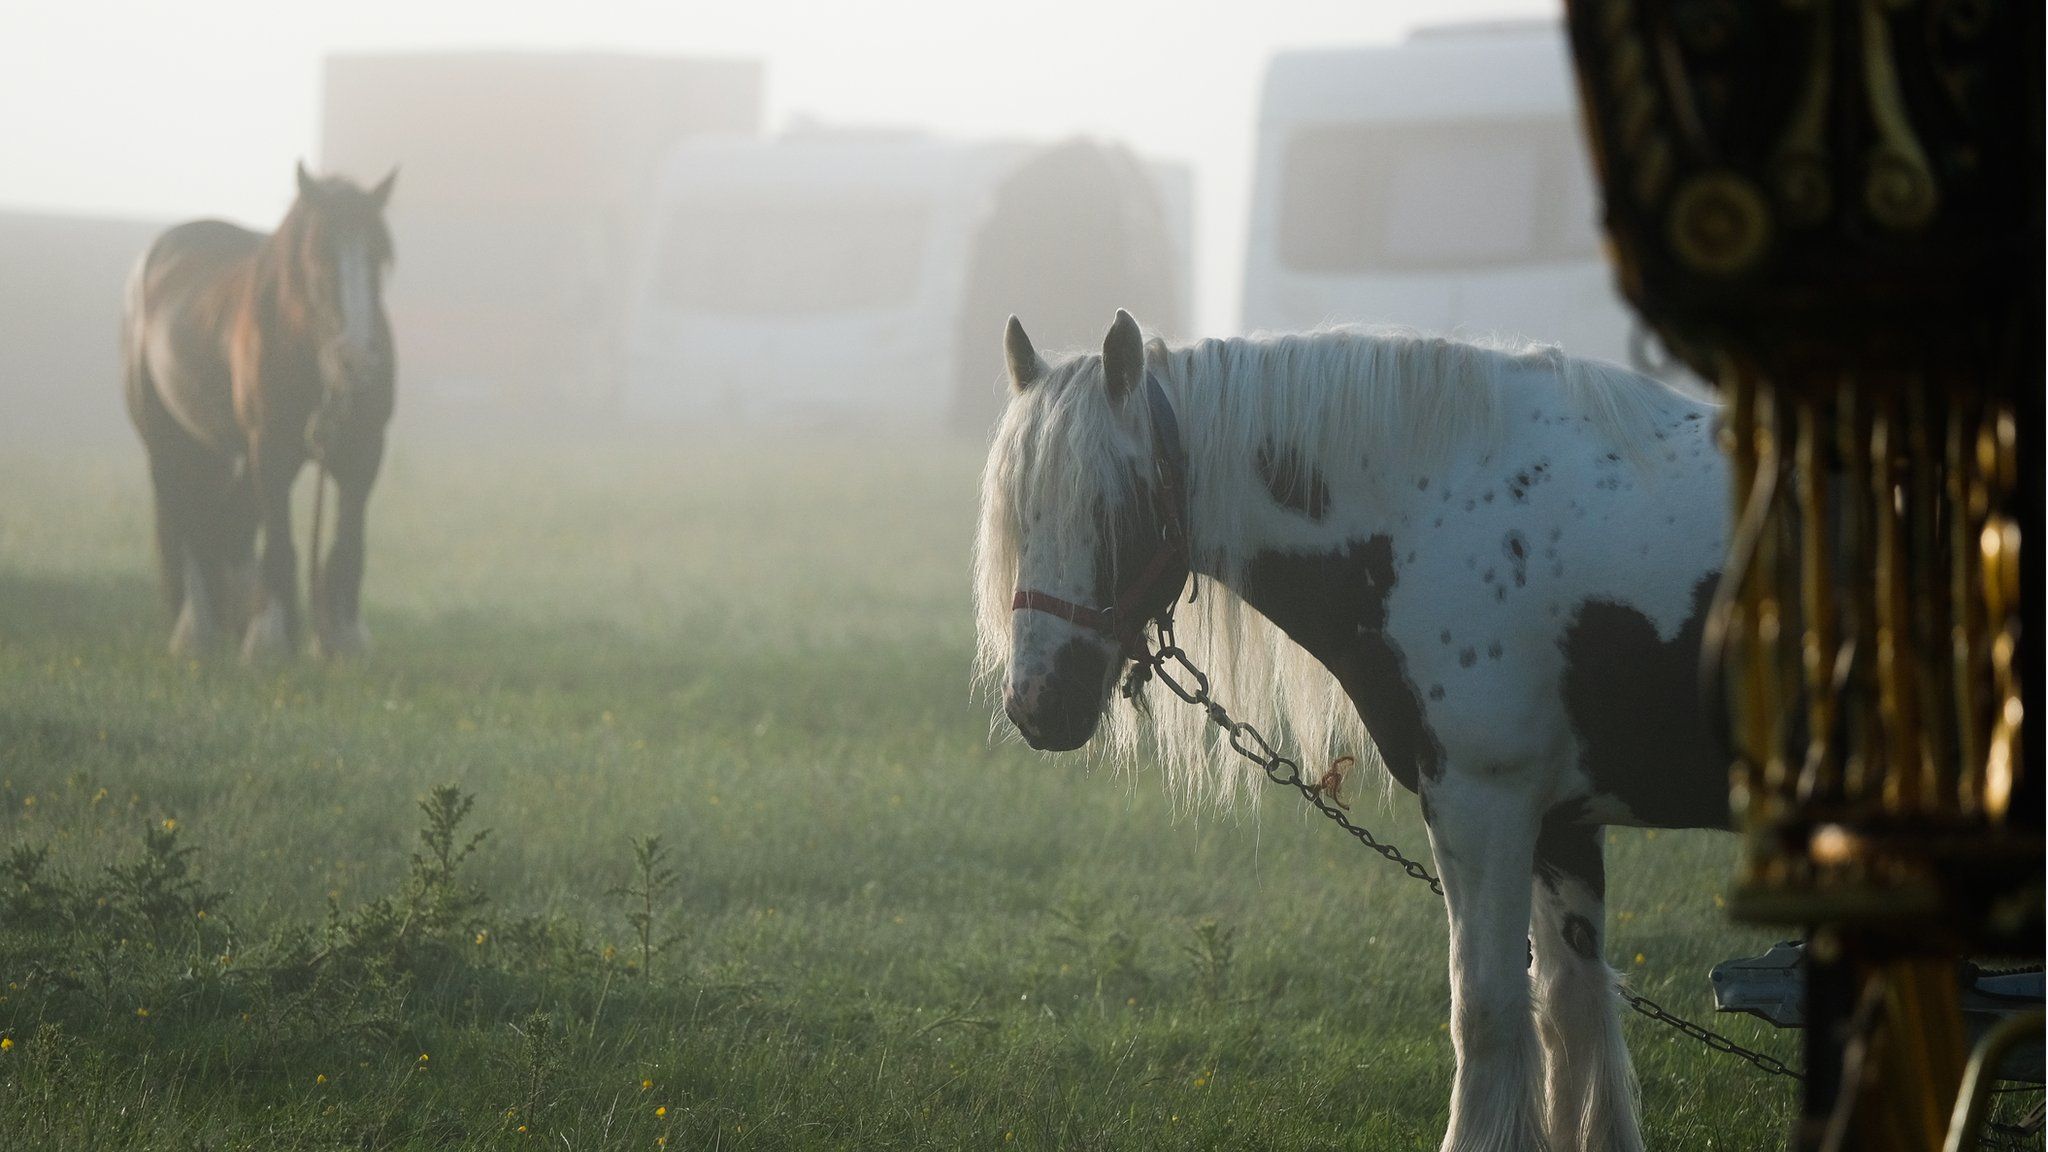 Horses at traveller site